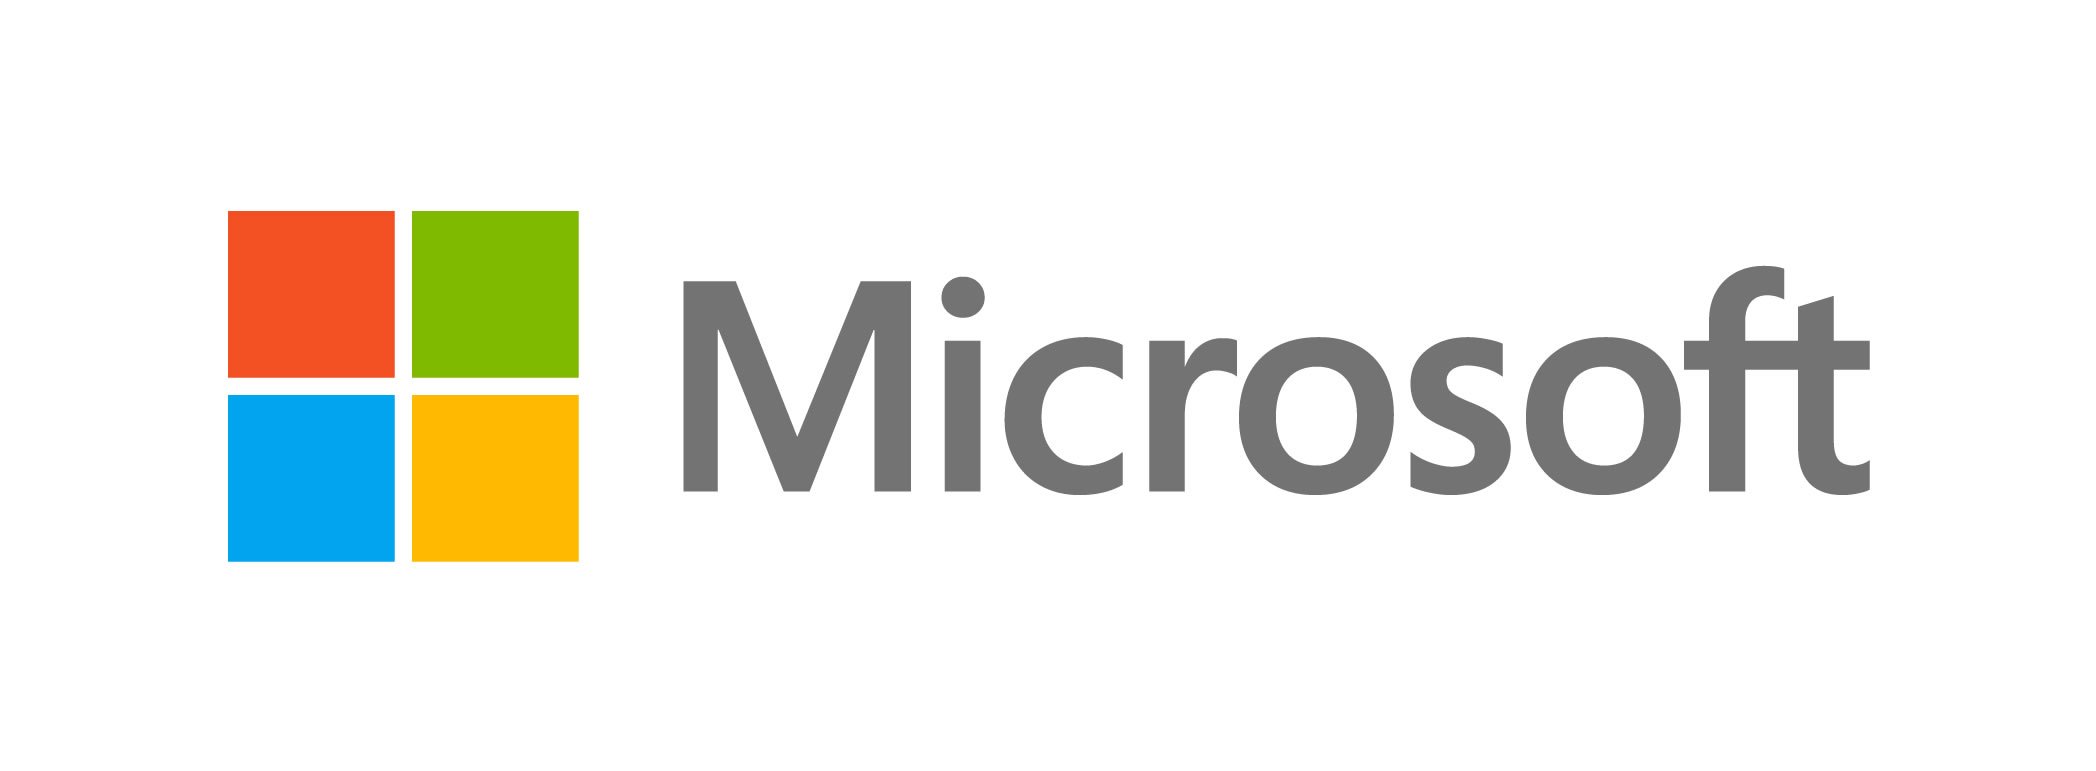 Zones announces investments to expand and accelerate customer adoption of the Microsoft platform